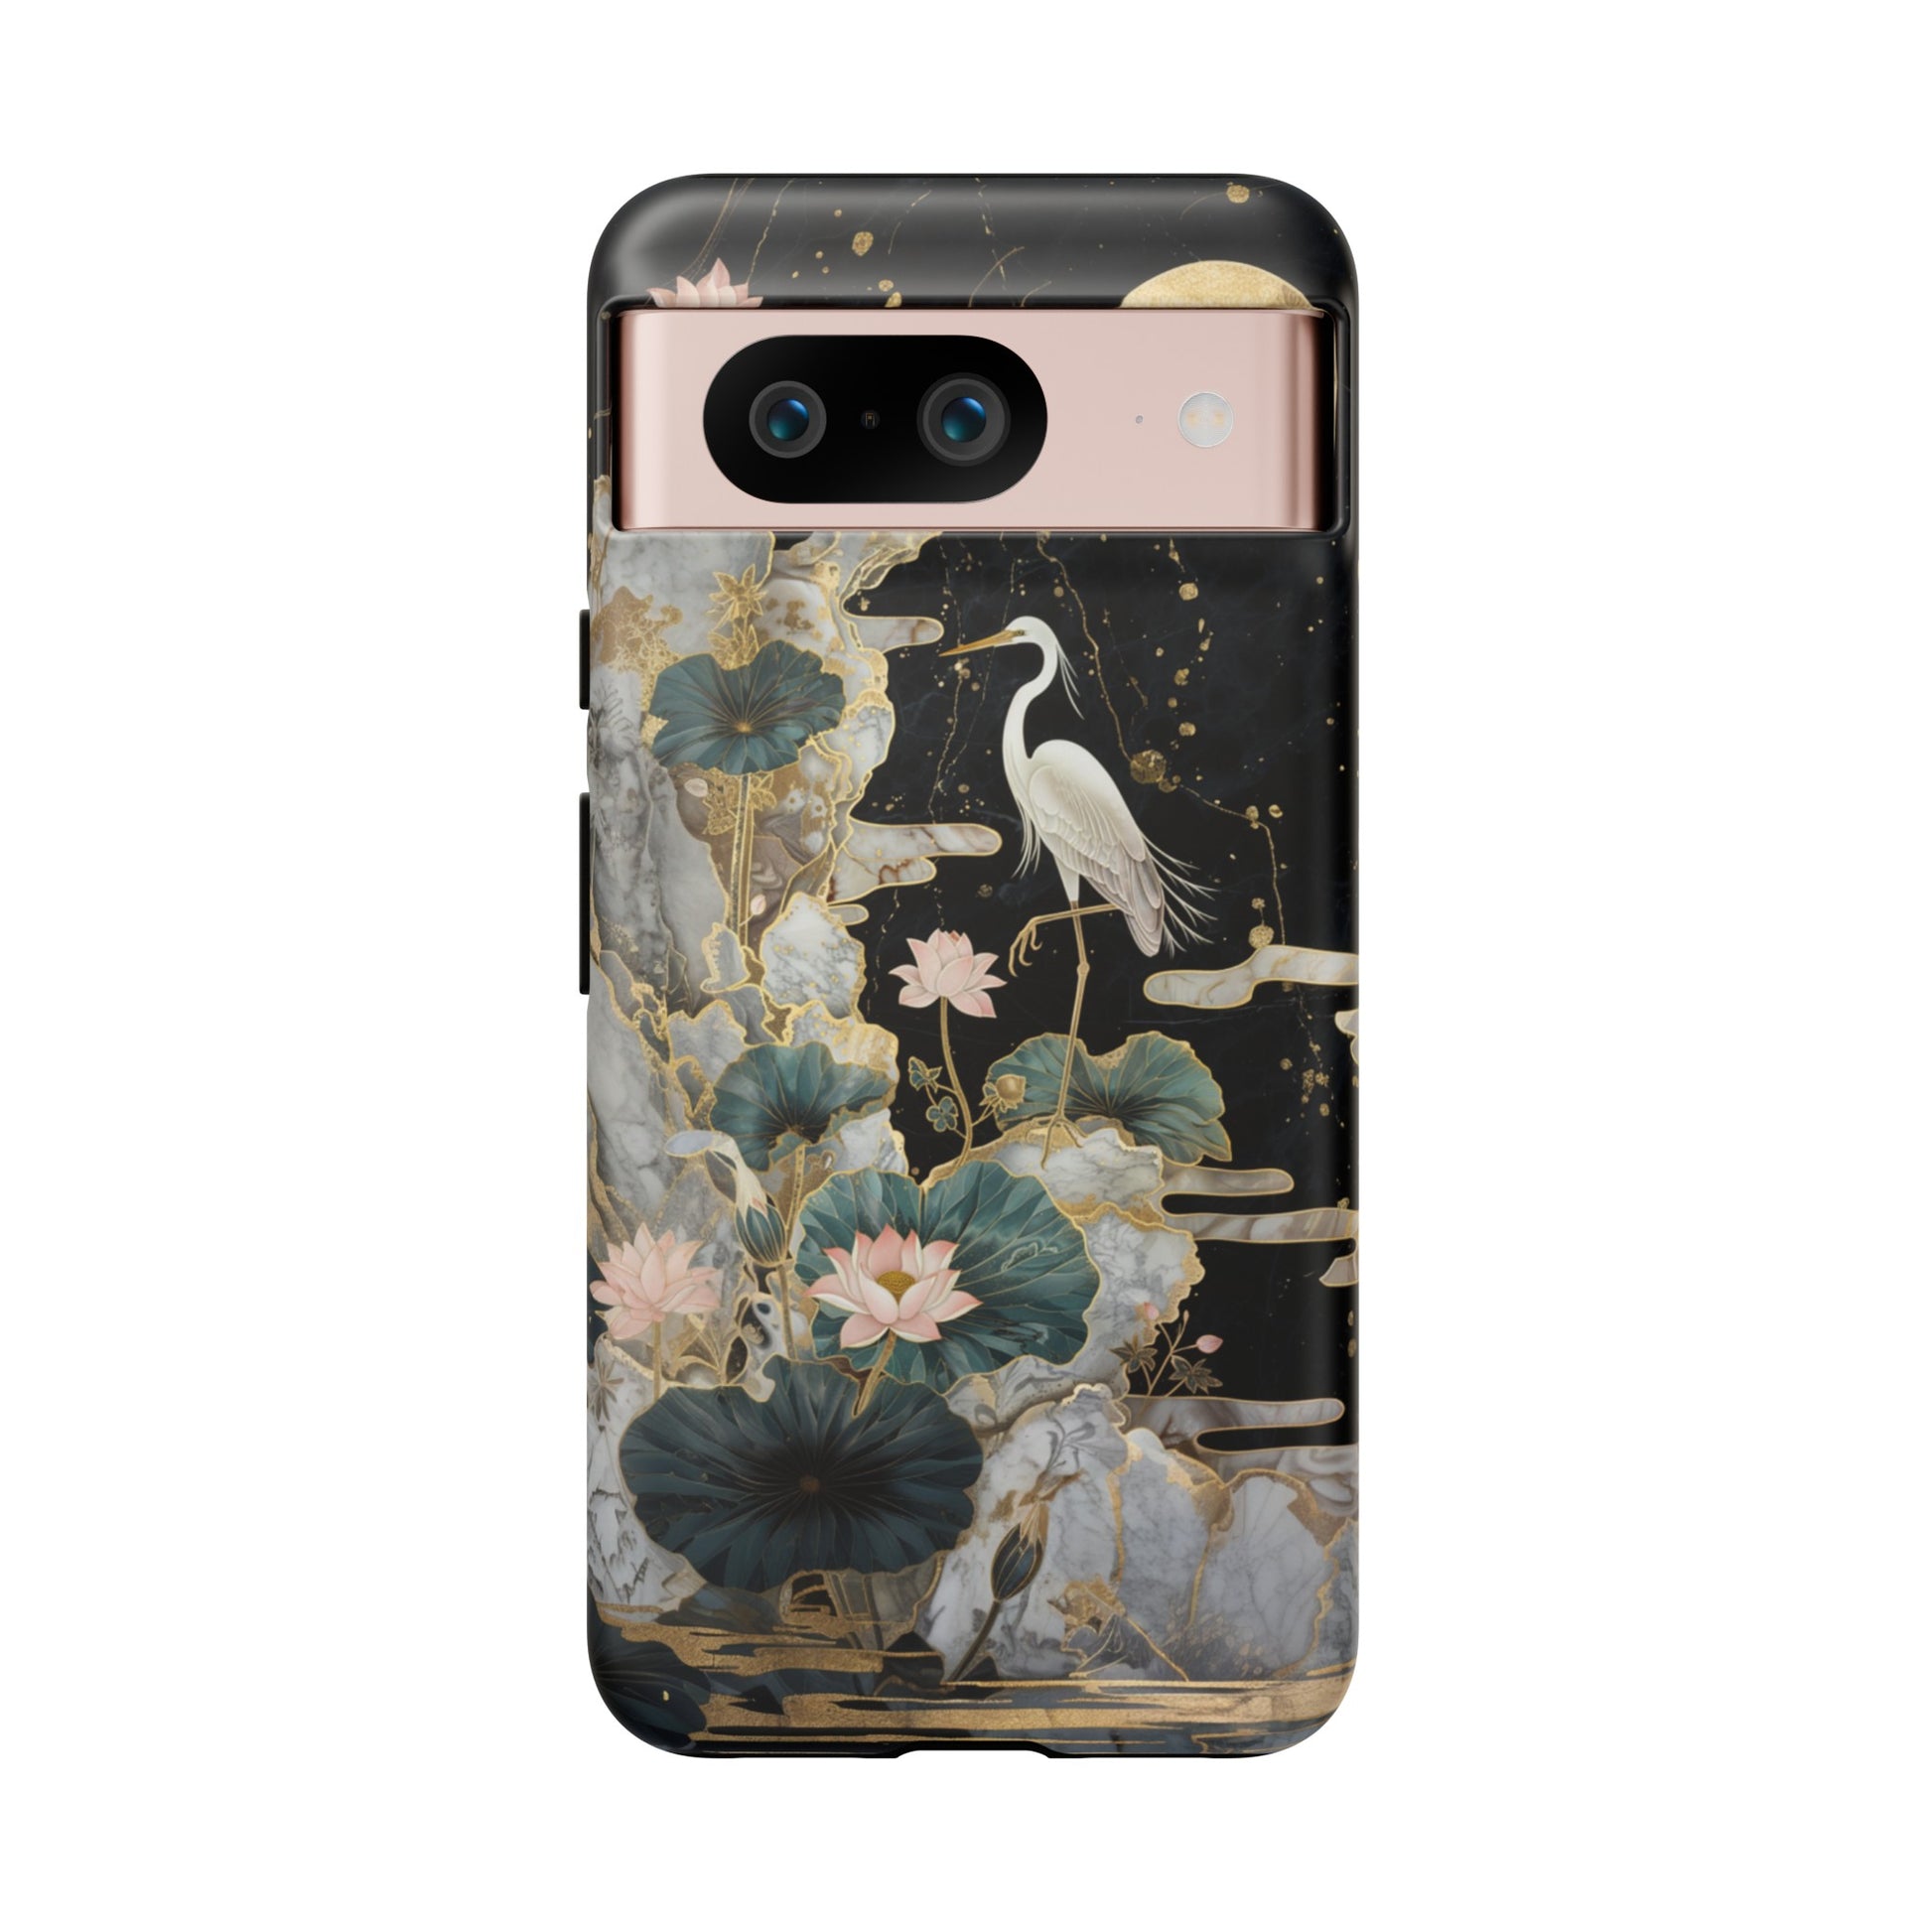 Heron and Moon Floral Art Phone Case